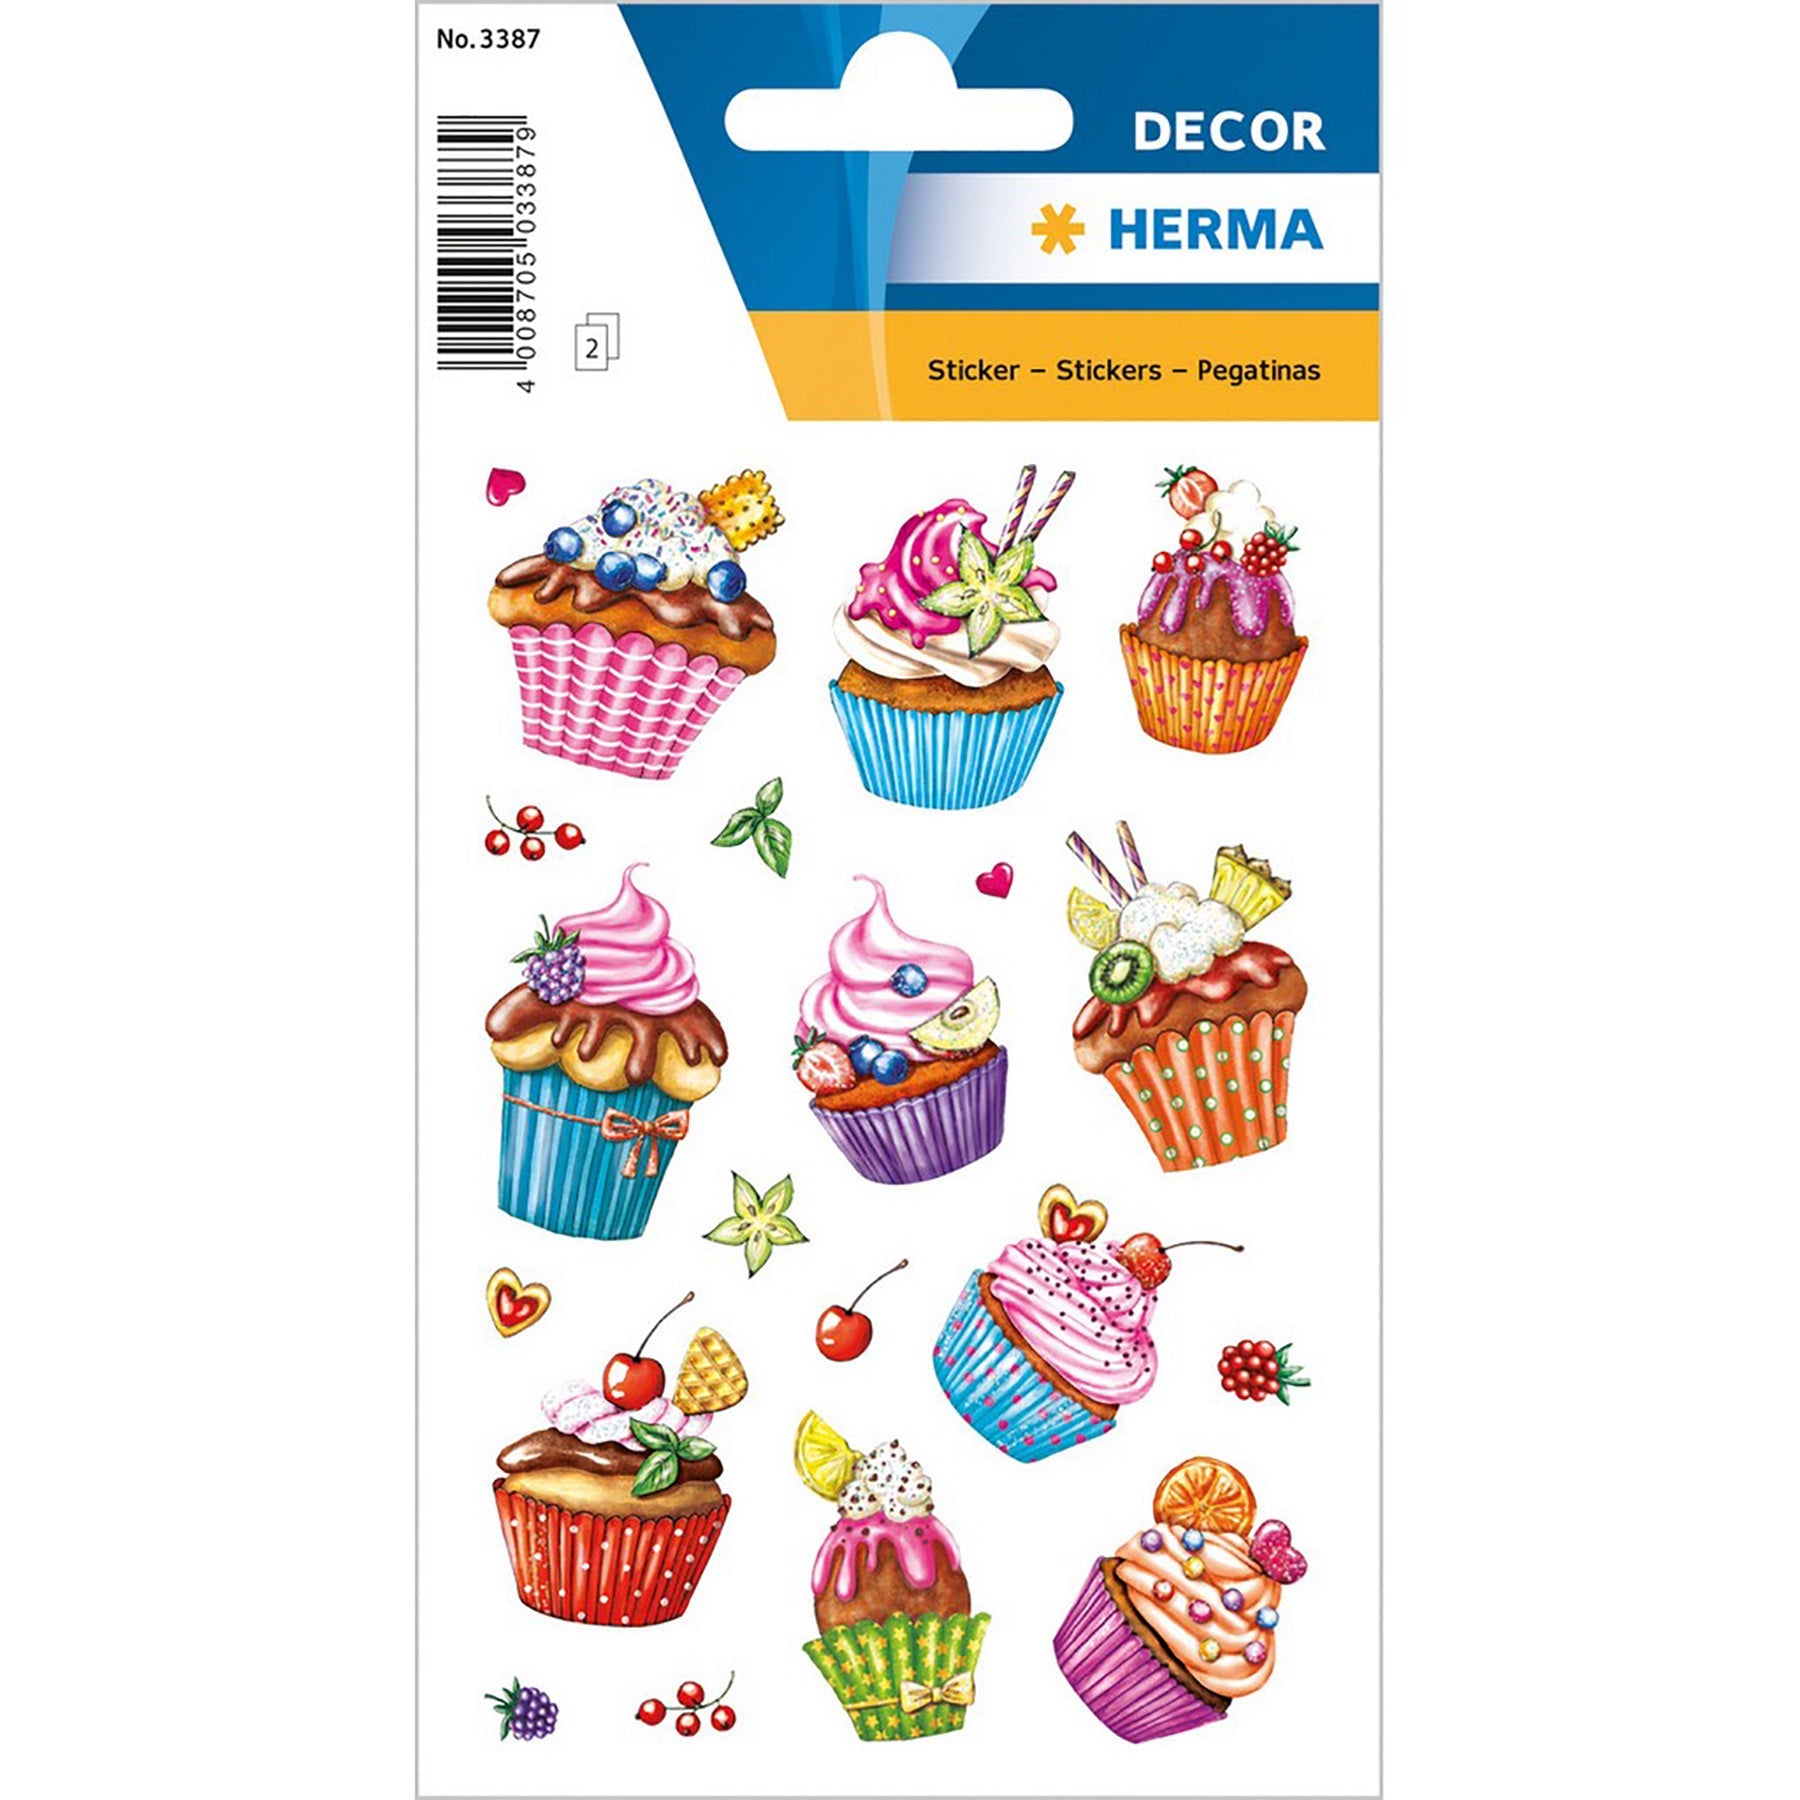 Herma Decor 2 Sheets Stickers Cupcakes Foil Glittery 4.75x3.1in Sheet